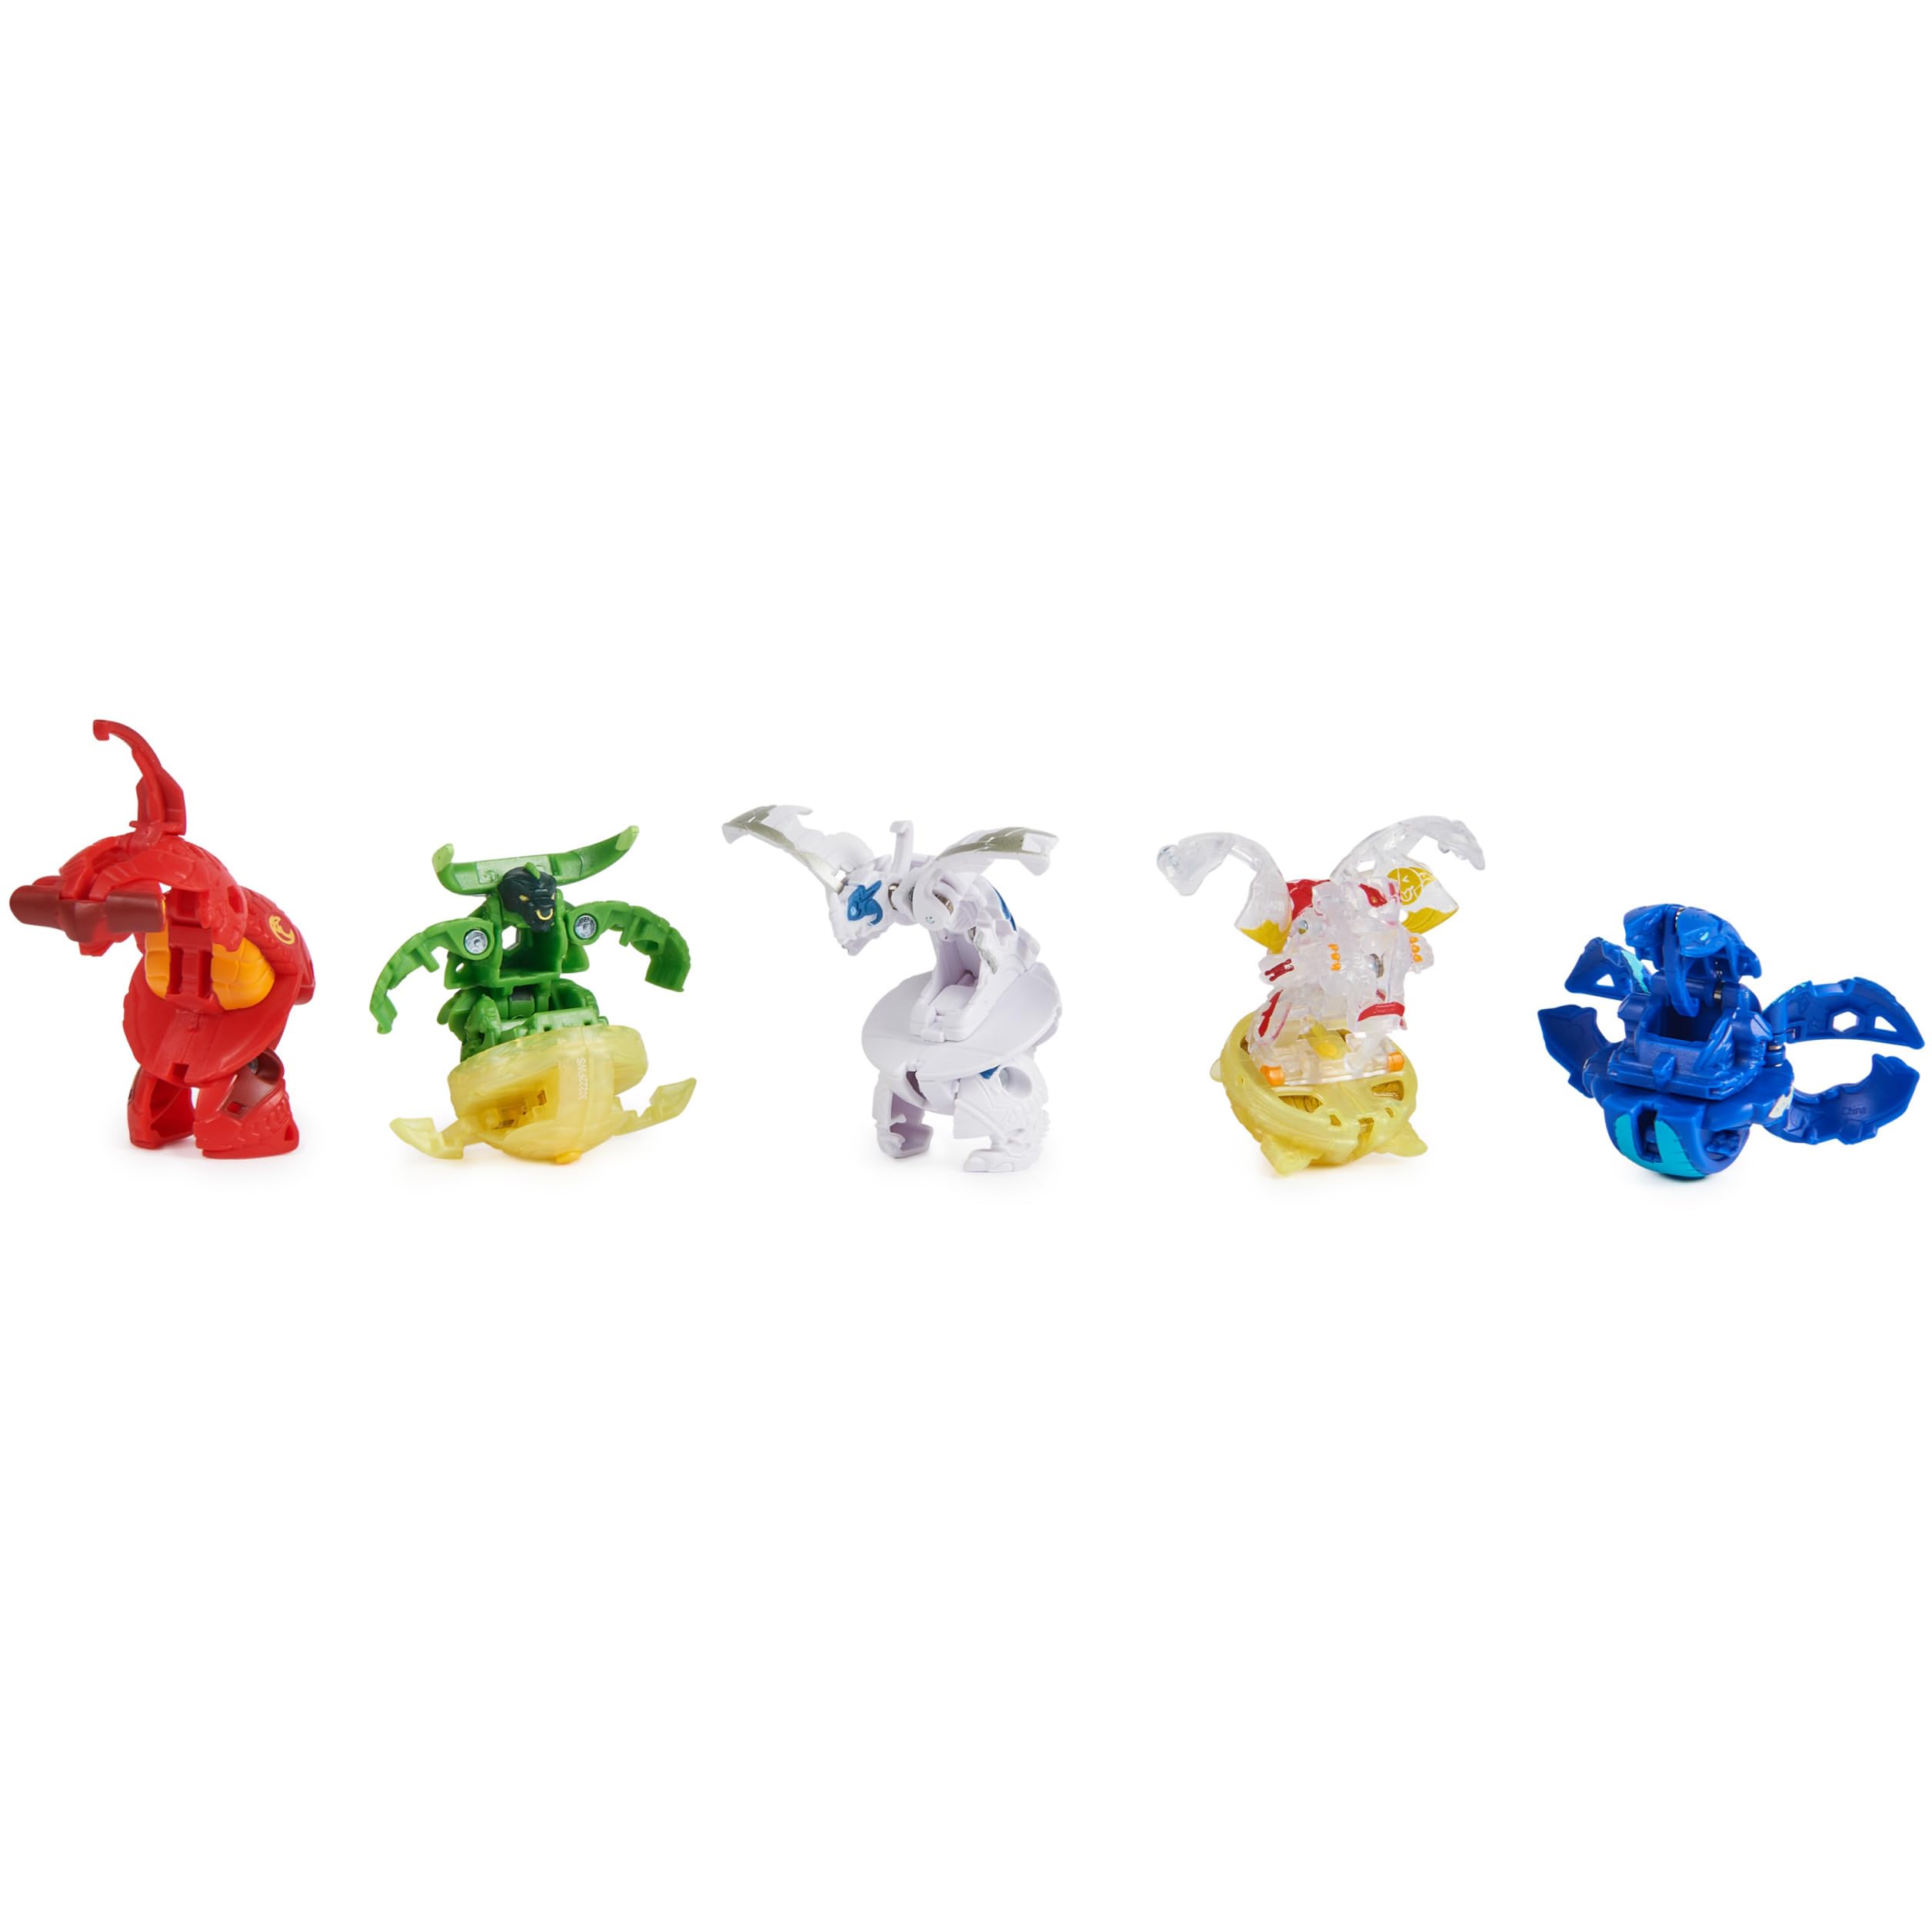 Bakugan Battle 5-Pack, Special Attack Bruiser, Dragonoids, Hammerhead, Nillious; Customizable, Spinning Action Figures, Kids Toys for Boys and Girls 6 and up